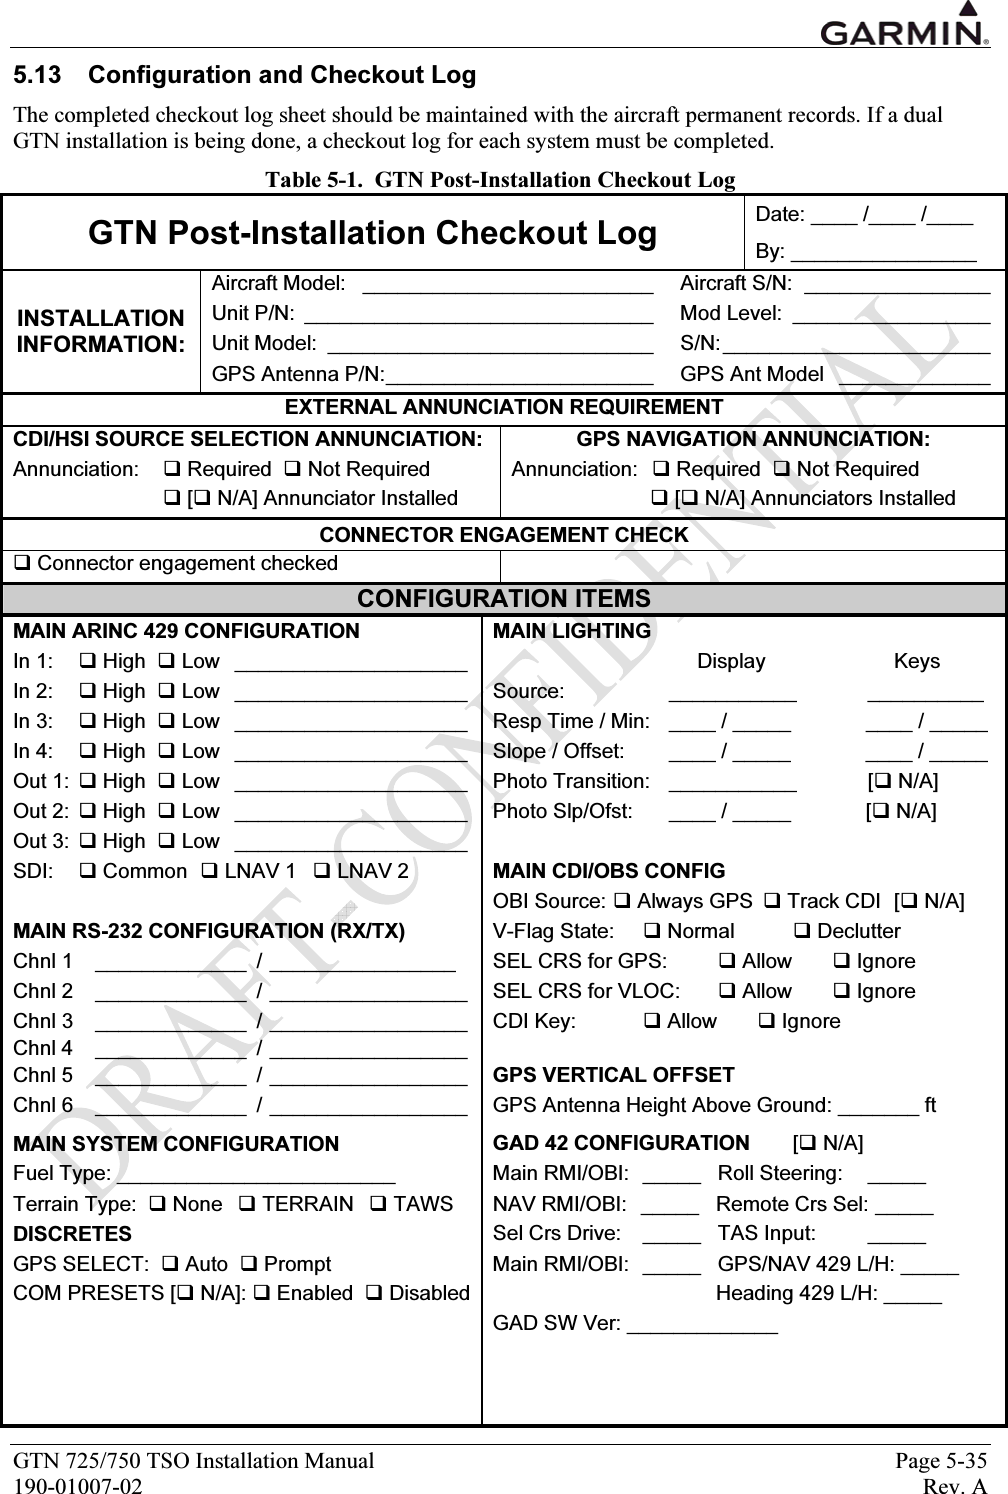  GTN 725/750 TSO Installation Manual  Page 5-35 190-01007-02  Rev. A 5.13  Configuration and Checkout Log The completed checkout log sheet should be maintained with the aircraft permanent records. If a dual GTN installation is being done, a checkout log for each system must be completed. Table 5-1.  GTN Post-Installation Checkout Log GTN Post-Installation Checkout Log  Date: ____ /____ /____ By: ________________ INSTALLATION INFORMATION: Aircraft Model:  _________________________  Unit P/N:  ______________________________  Unit Model:  ____________________________  GPS Antenna P/N:_______________________  Aircraft S/N:  ________________Mod Level:  _________________S/N:_______________________GPS Ant Model  _____________EXTERNAL ANNUNCIATION REQUIREMENT CDI/HSI SOURCE SELECTION ANNUNCIATION:  GPS NAVIGATION ANNUNCIATION: Annunciation:   Required   Not Required  Annunciation:   Required   Not Required  [ N/A] Annunciator Installed   [ N/A] Annunciators Installed CONNECTOR ENGAGEMENT CHECK  Connector engagement checked   CONFIGURATION ITEMS MAIN ARINC 429 CONFIGURATION  MAIN LIGHTING In 1:    High   Low  ____________________ Display  Keys In 2:   High   Low  ____________________ Source:   ___________  __________ In 3:   High   Low  ____________________ Resp Time / Min:   ____ / _____  ____ / _____ In 4:   High   Low  ____________________ Slope / Offset:   ____ / _____  ____ / _____ Out 1:   High   Low  ____________________ Photo Transition:   ___________  [ N/A] Out 2:   High   Low  ____________________ Photo Slp/Ofst:  ____ / _____  [ N/A] Out 3:   High   Low  ____________________  SDI:    Common   LNAV 1   LNAV 2    MAIN CDI/OBS CONFIG  OBI Source:  Always GPS   Track CDI  [ N/A] MAIN RS-232 CONFIGURATION (RX/TX)  V-Flag State:   Normal    Declutter  Chnl 1  _____________ / ________________   SEL CRS for GPS:       Allow        Ignore Chnl 2  _____________ / _________________ SEL CRS for VLOC:    Allow        Ignore Chnl 3  _____________ / _________________ CDI Key:    Allow        Ignore Chnl 4  _____________ / _________________  Chnl 5  _____________ / _________________ GPS VERTICAL OFFSET Chnl 6  _____________ / _________________ GPS Antenna Height Above Ground: _______ ft    MAIN SYSTEM CONFIGURATION  GAD 42 CONFIGURATION   [ N/A] Fuel Type: ________________________  Main RMI/OBI:  _____  Roll Steering:  _____ Terrain Type:   None   TERRAIN    TAWS  NAV RMI/OBI:   _____  Remote Crs Sel: _____ DISCRETES  Sel Crs Drive:   _____  TAS Input:   _____ GPS SELECT:   Auto   Prompt  Main RMI/OBI:  _____  GPS/NAV 429 L/H: _____ COM PRESETS [ N/A]:  Enabled   Disabled Heading 429 L/H: _____   GAD SW Ver: _____________   